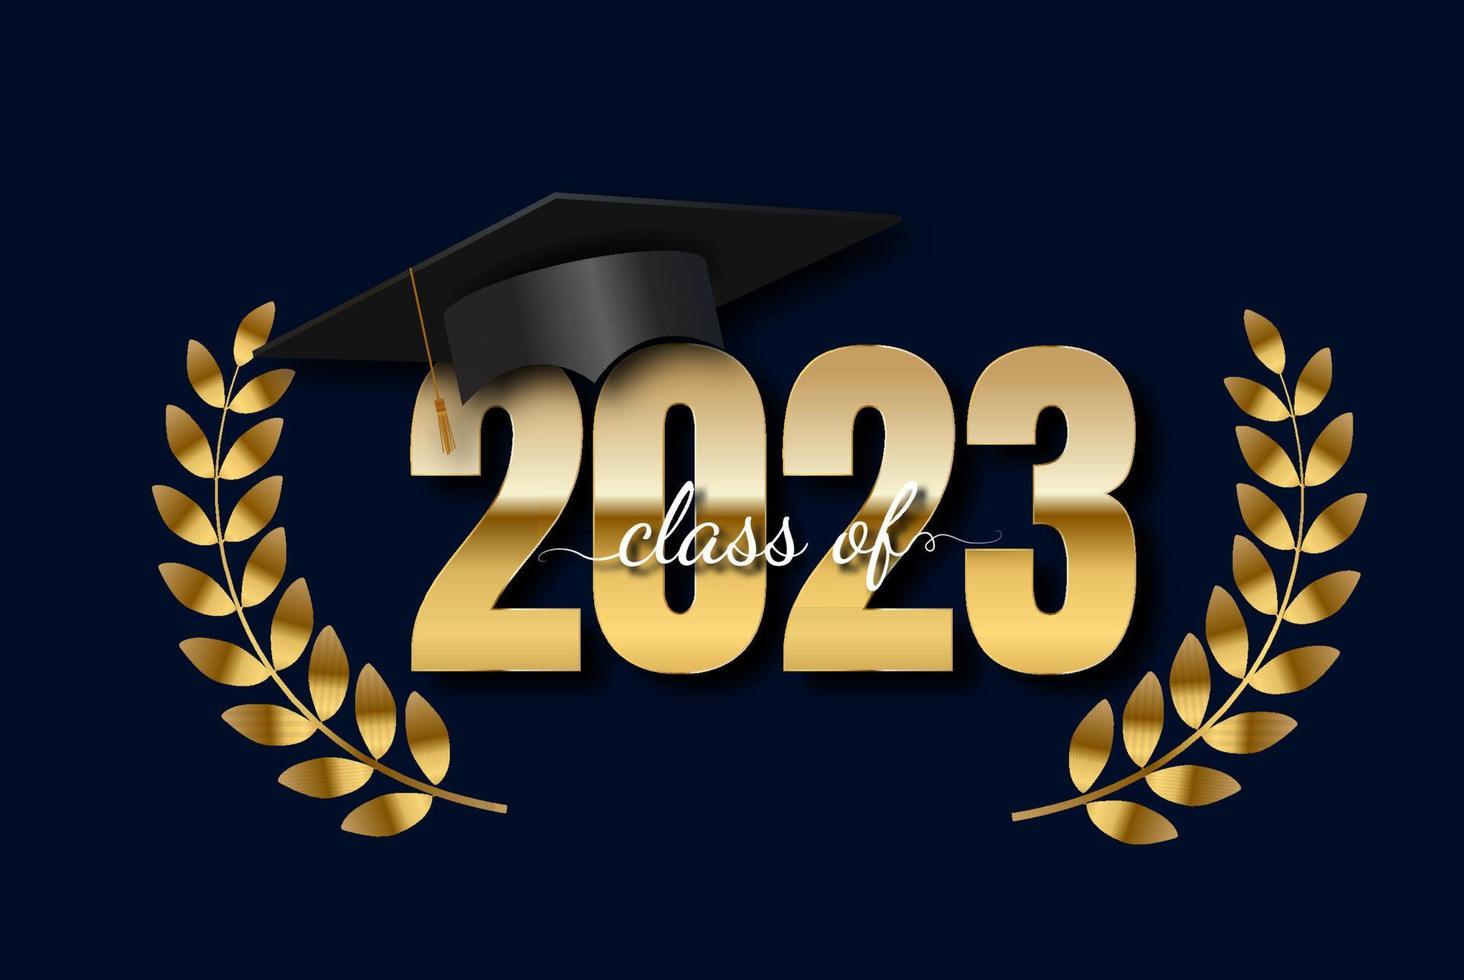 Happy Class of 2023 Greeting Vector Illustration EPS10